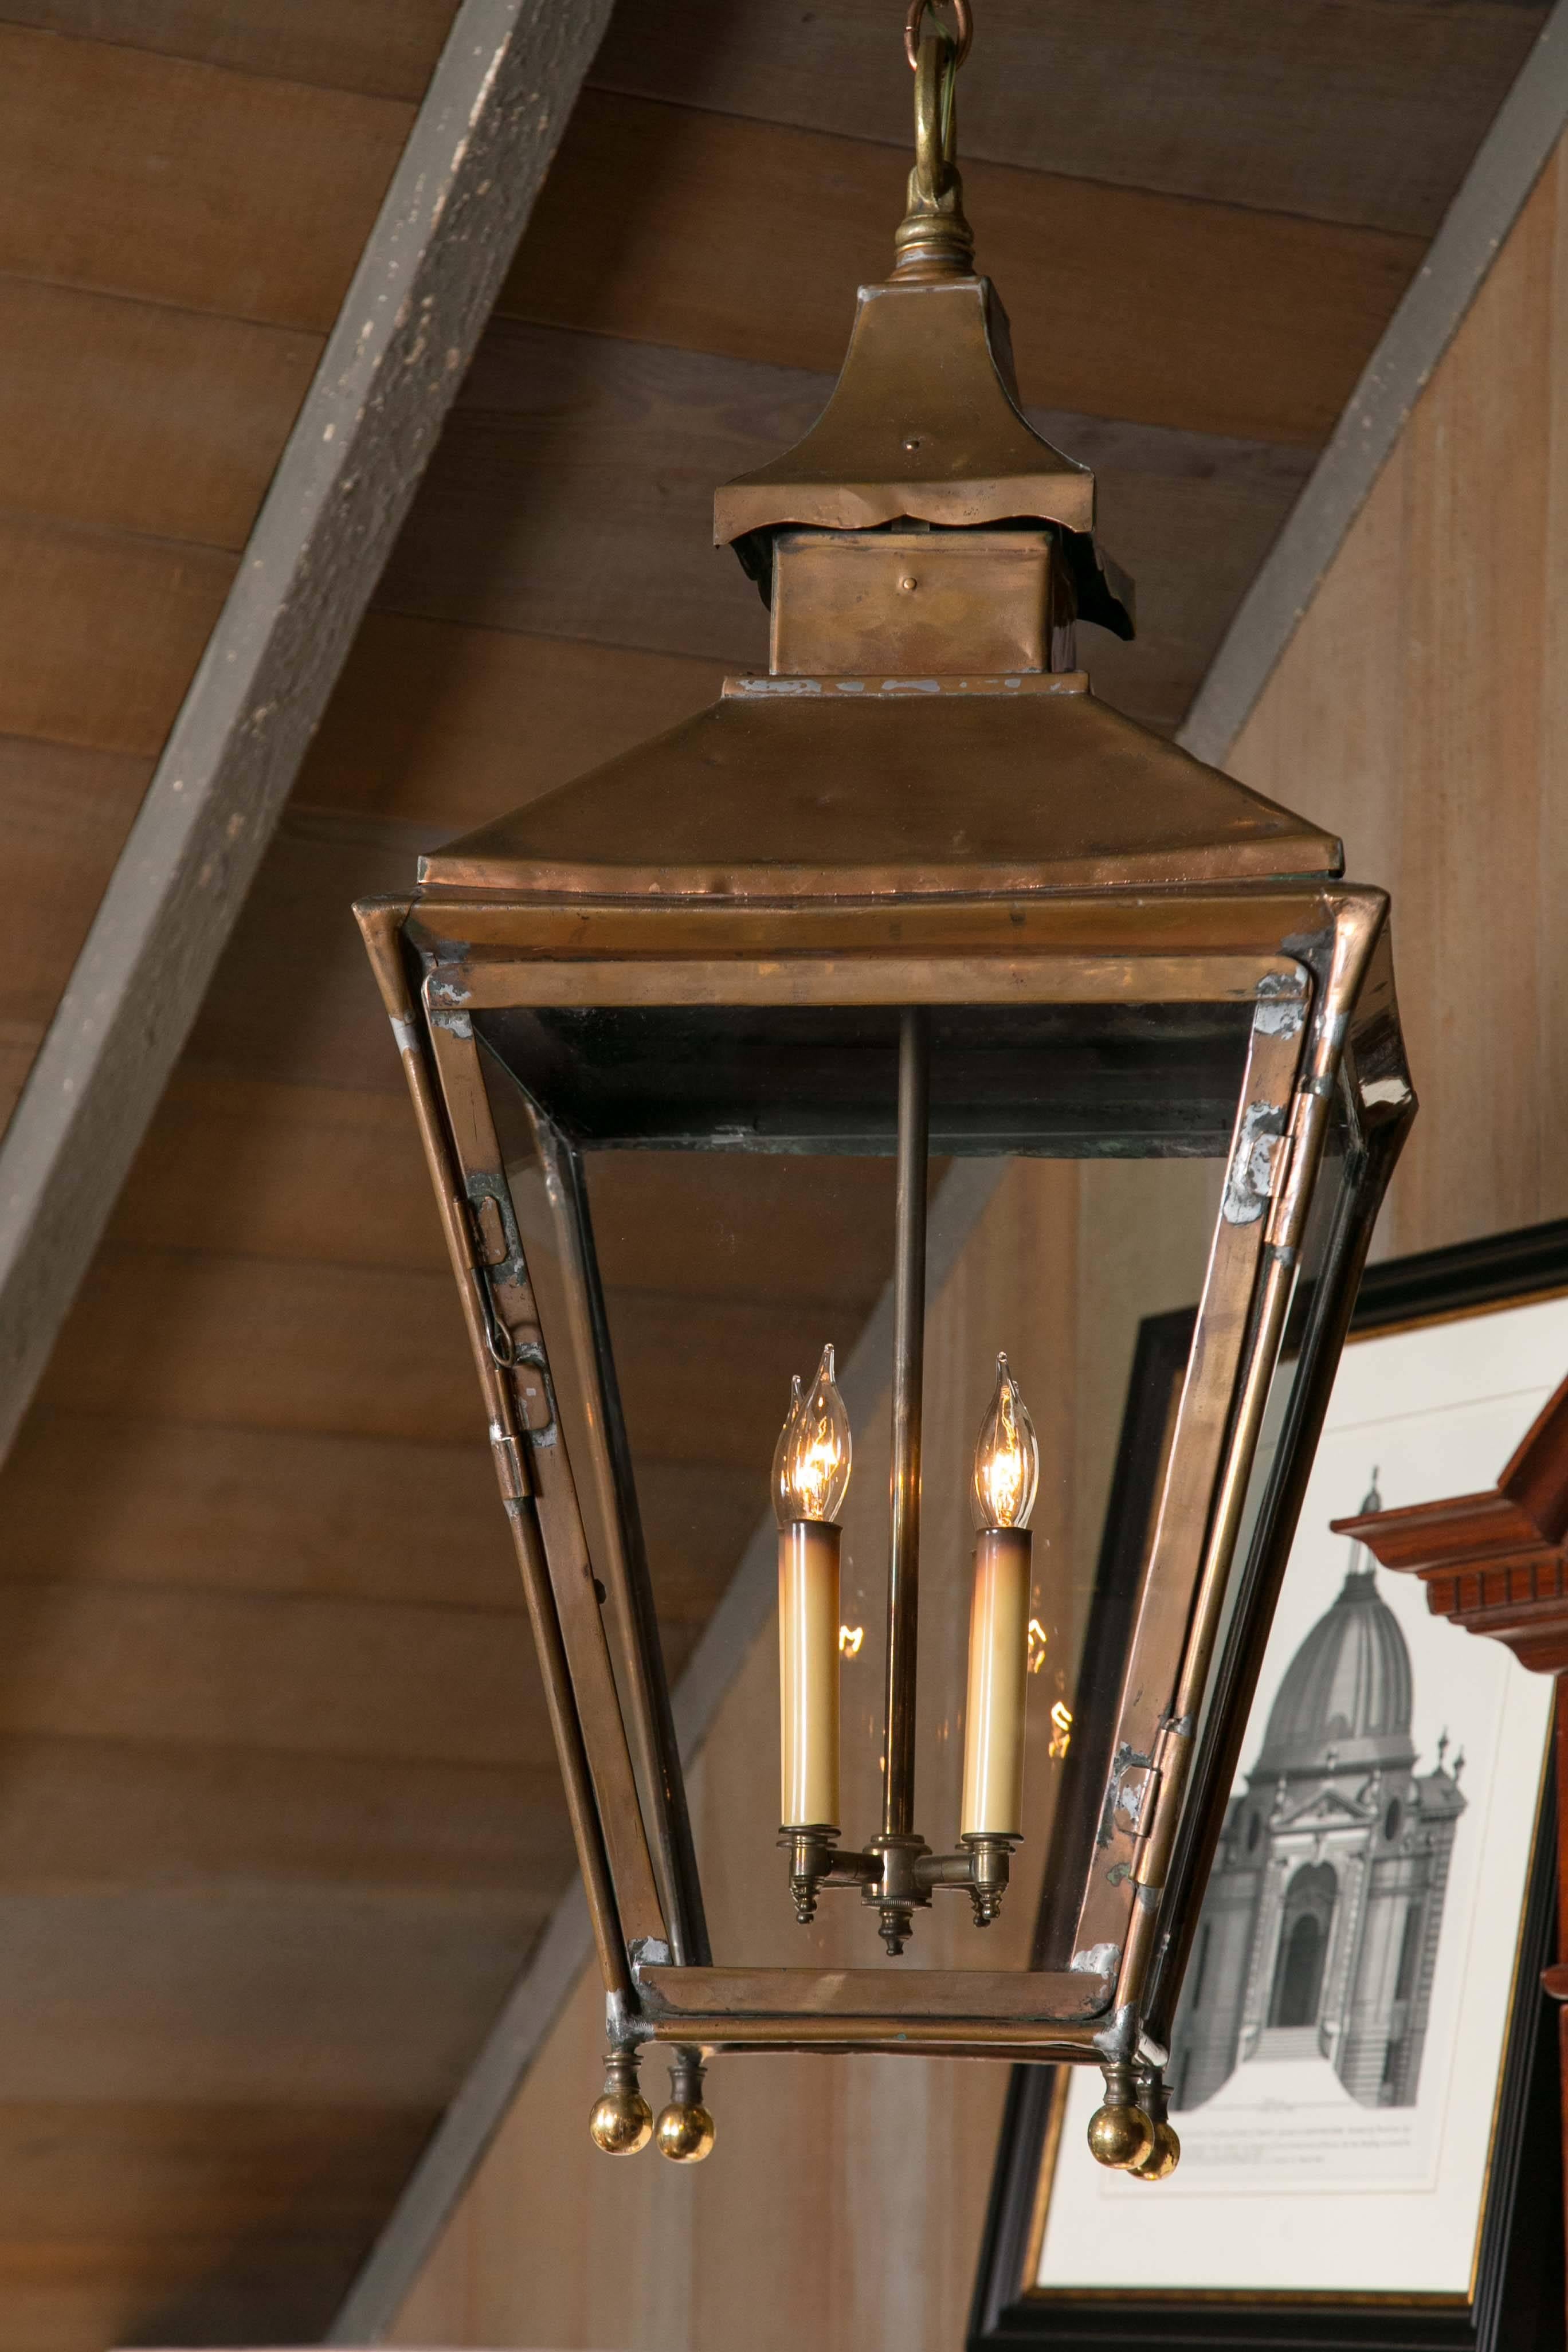 Large, handmade lantern in solid cooper. Classic in its design, this one-of-a-kind lantern would be focal point in any room, whether traditional or modern.